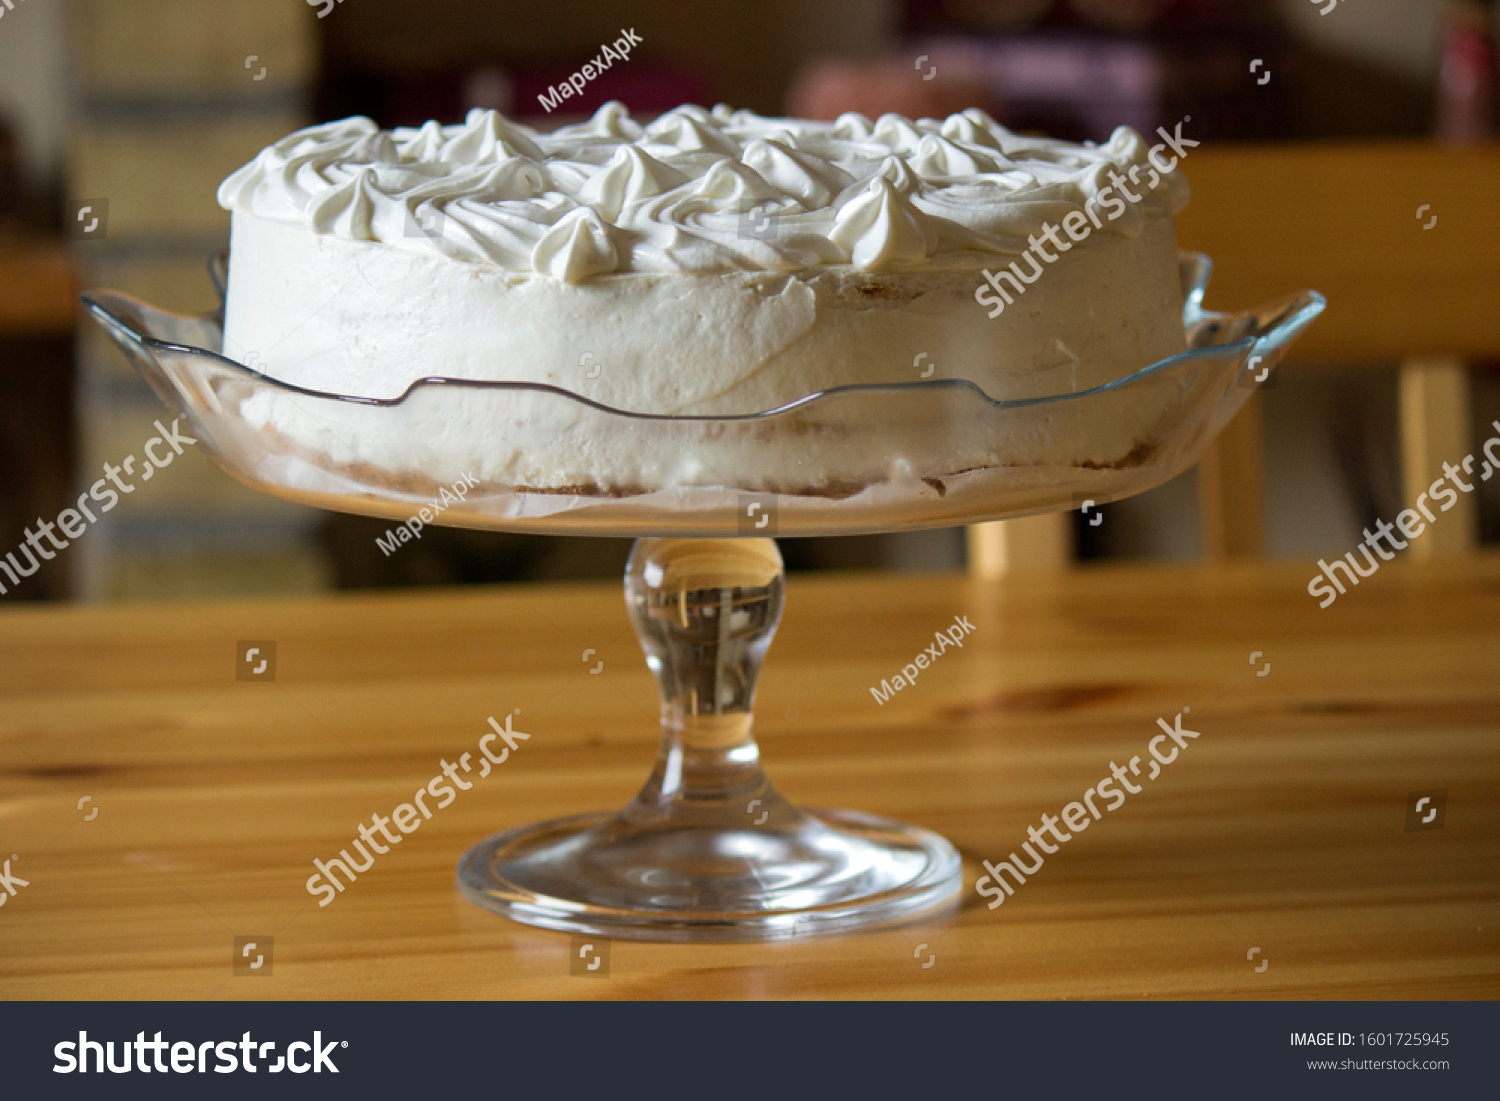 Front look Of A White Frosted Cake Placed On A Glass Plate.Wooden Table Below. #1601725945